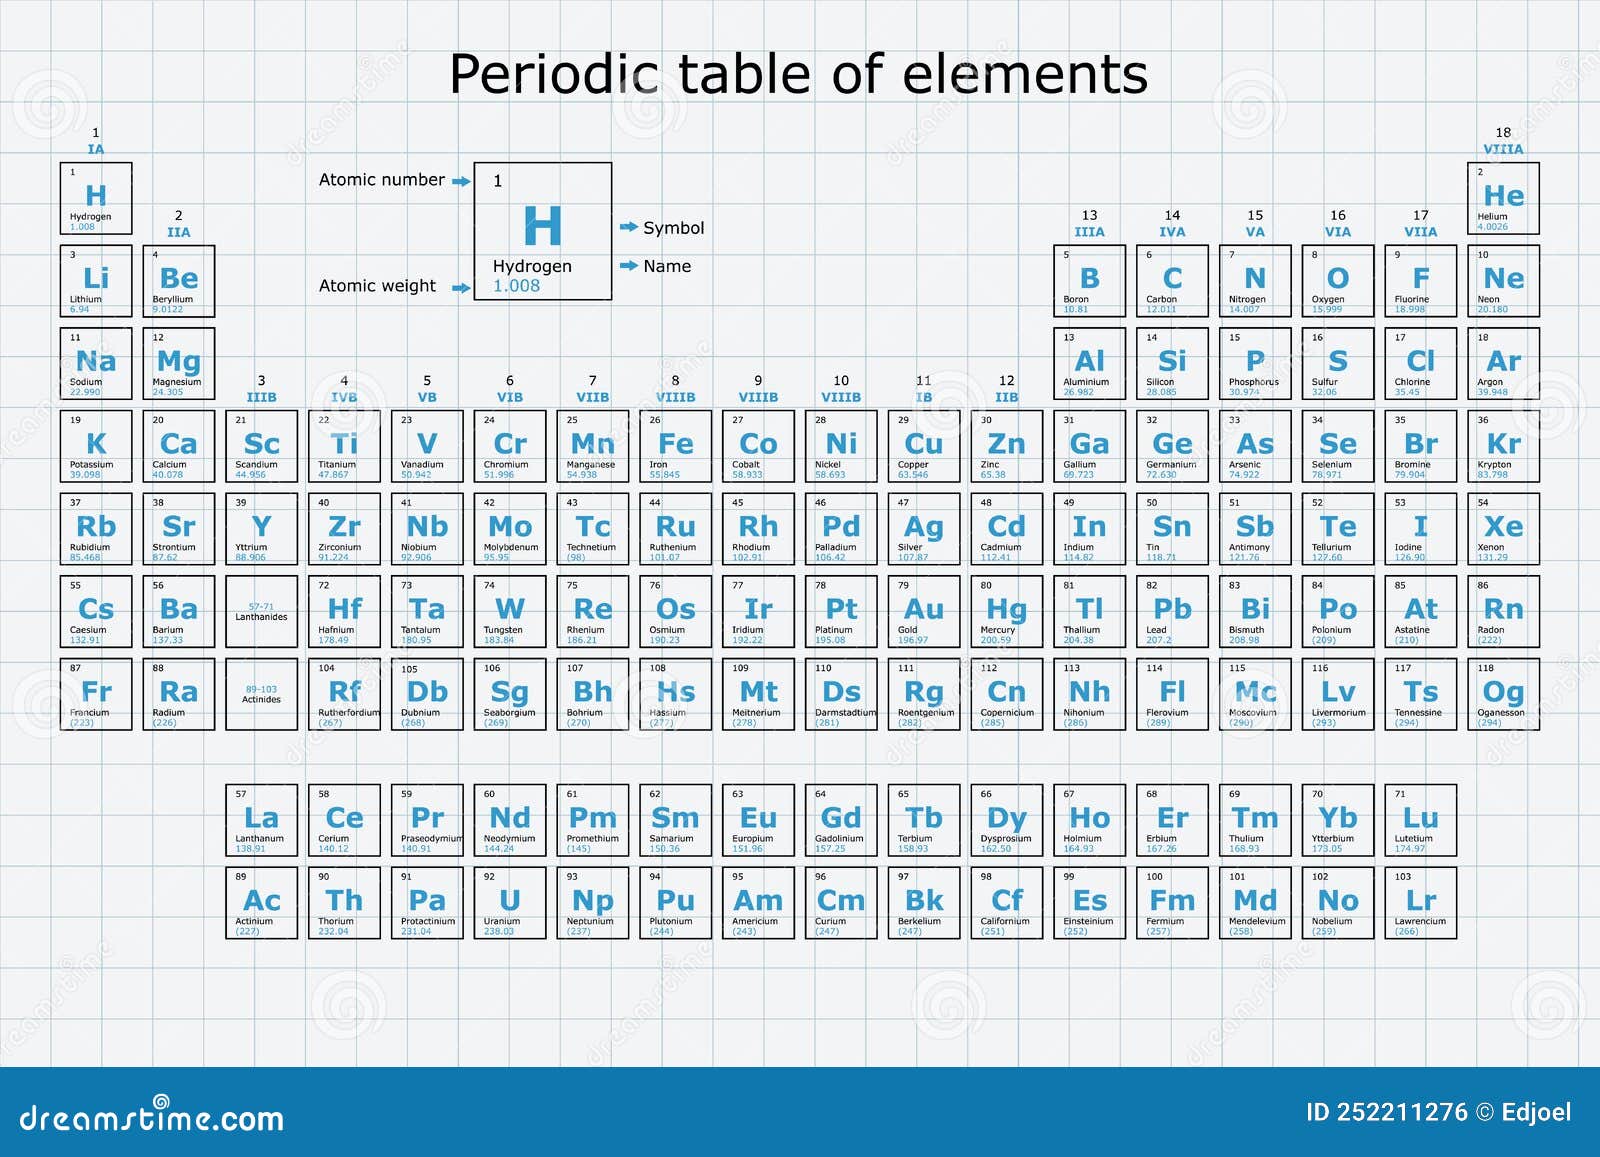 Атомные номера. Chemical elements with Atomic number and symbols. Lit element